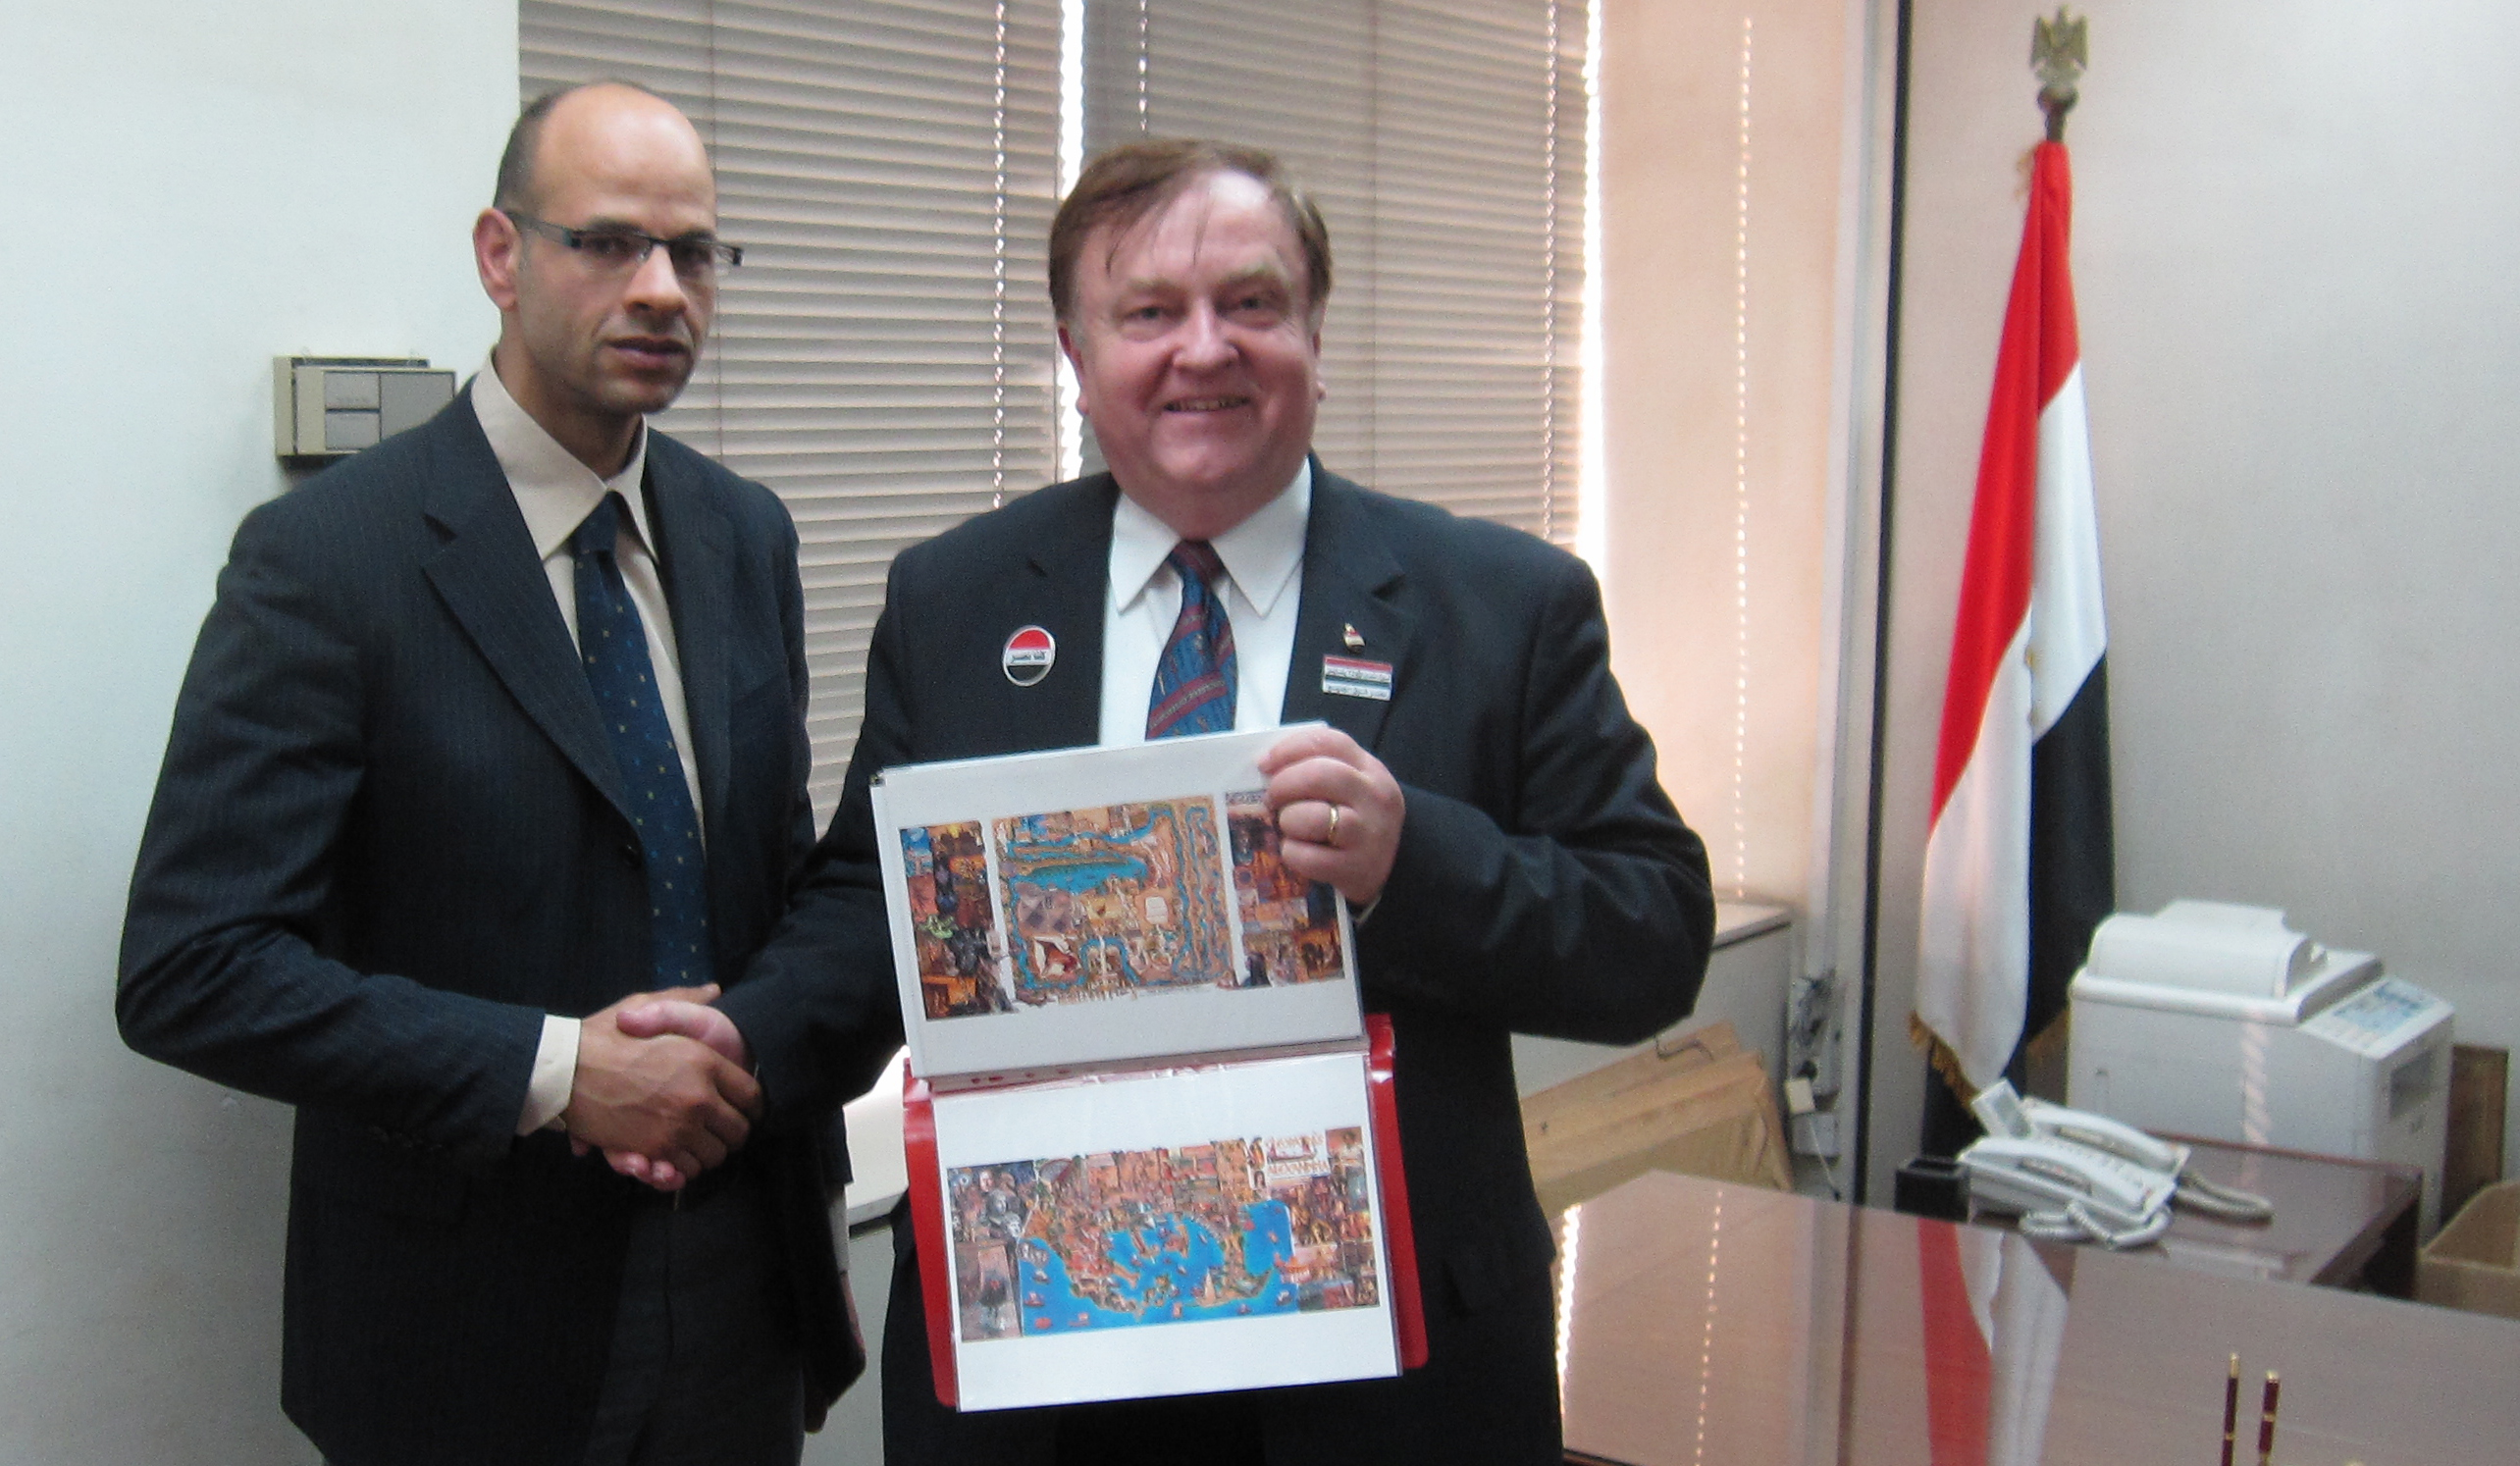 Egypt Post-Revolution, Tourism Development Authority March 24, 2011, Cairo - Mr. Adel El-Gendy - Full Welcome!